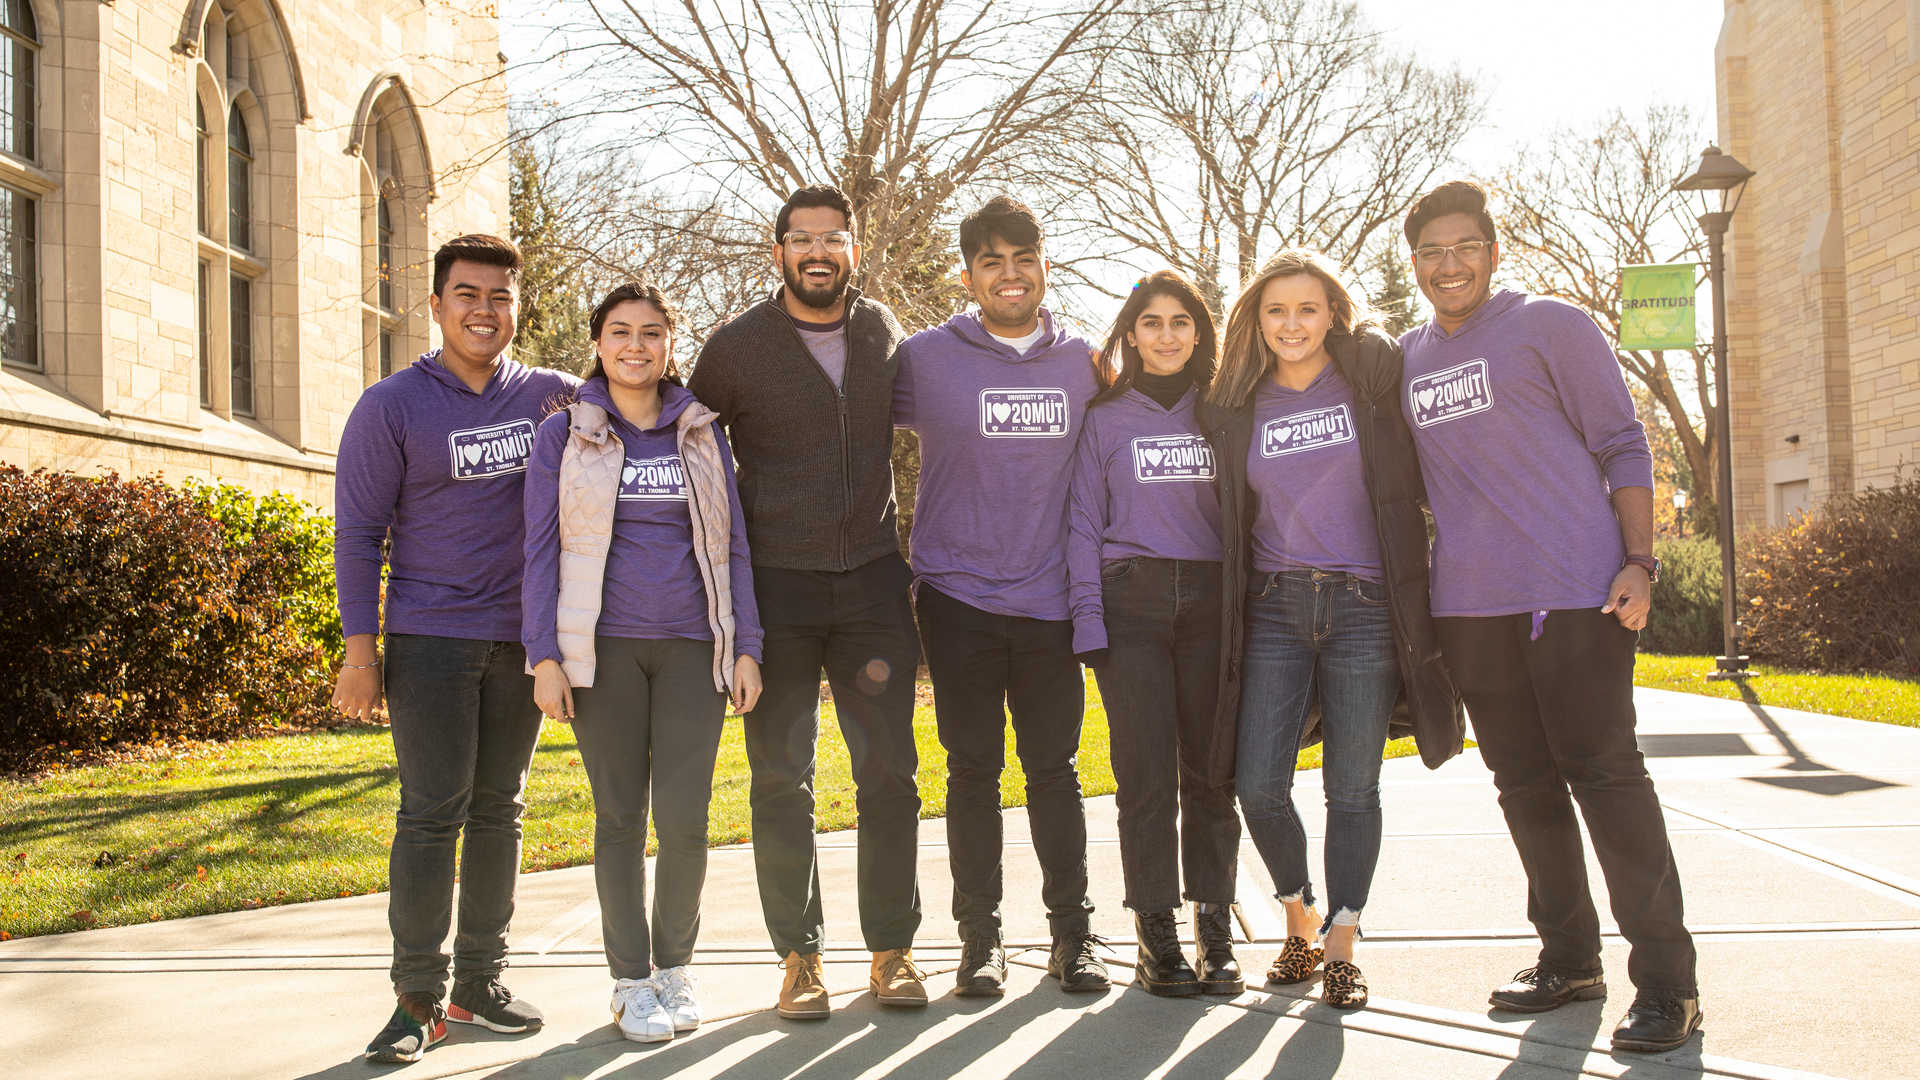 Students pose in commuter t-shirts in a photo shoot for Off Campus Student Life in and around the Anderson Student Center on November 5, 2019, in St. Paul.